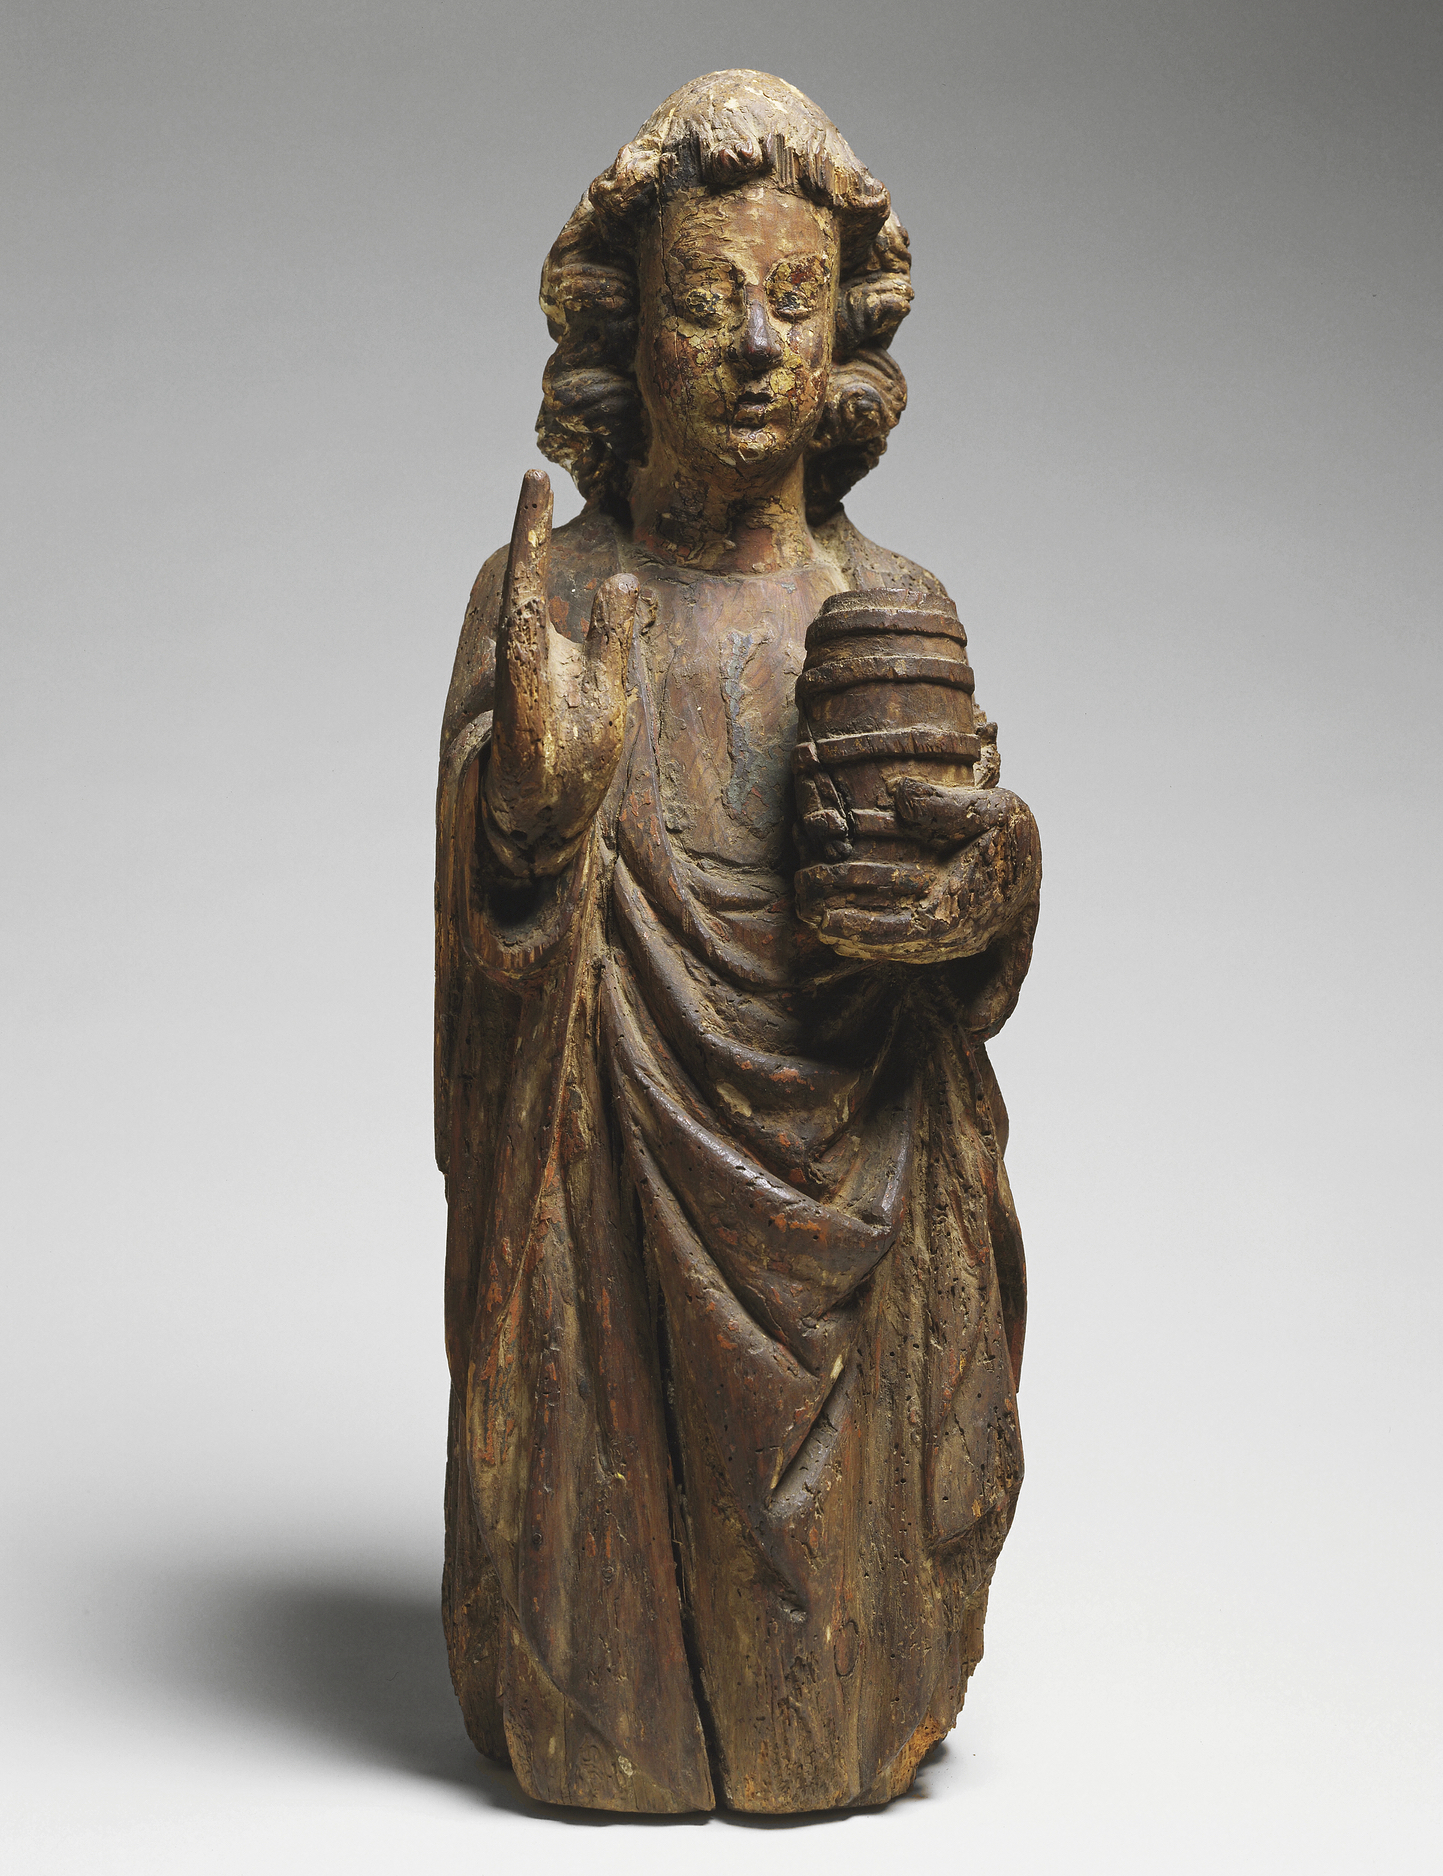 Wooden sculpture of a saint in robes carrying a vessel and holding one hand up.